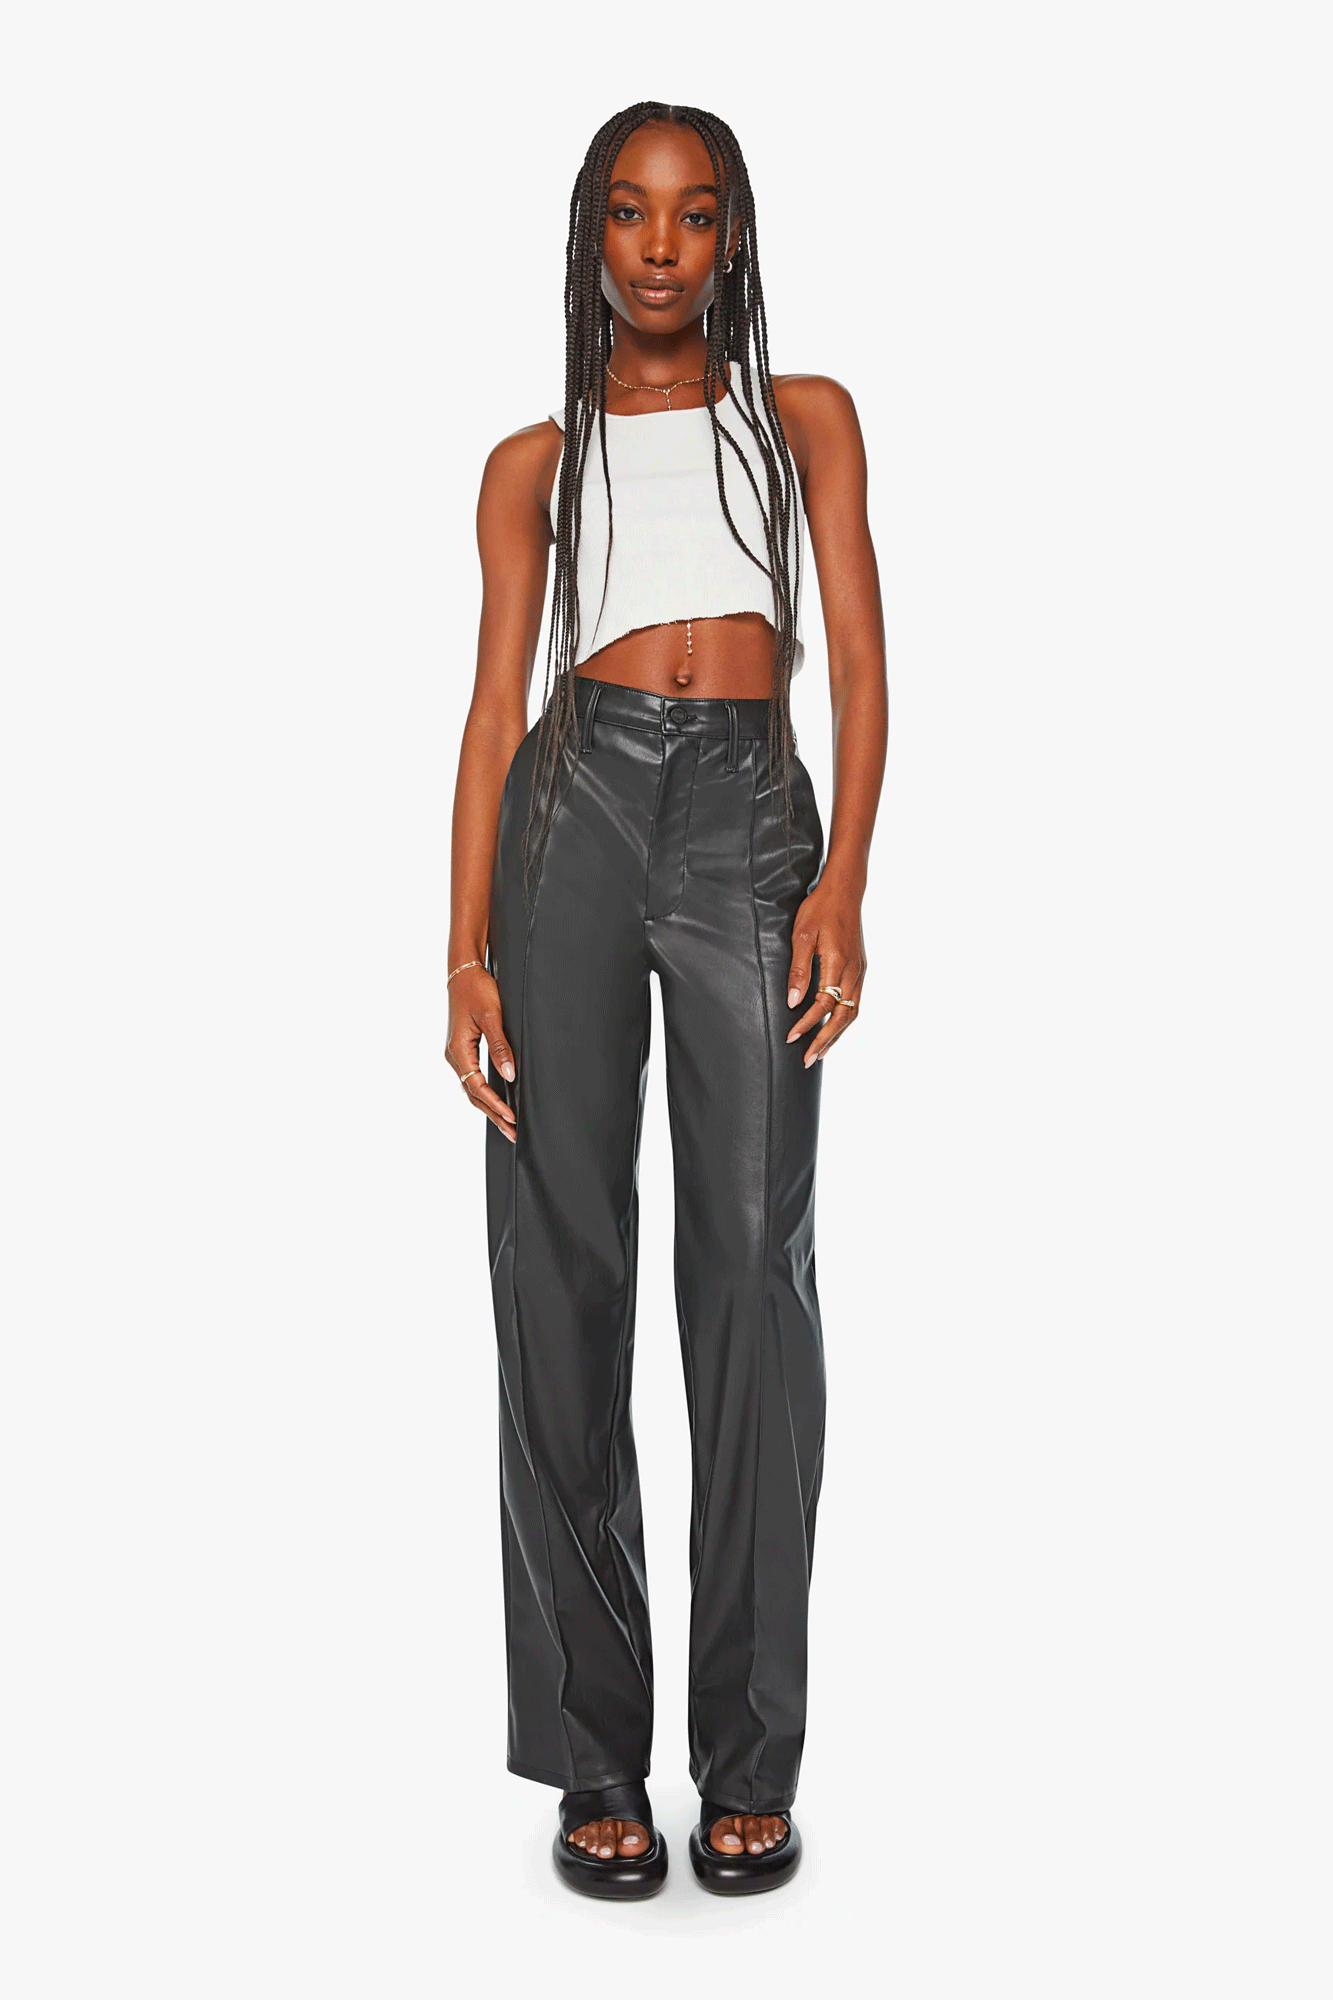 Experience elevated style in these high-waisted pants from Mother with a wide, loose leg. Crafted from a buttery soft faux leather, the pants feature a button fly and pintuck detailing on the front. Finished with an ankle-length inseam and a clean hem. Stand out in comfort and sophistication.